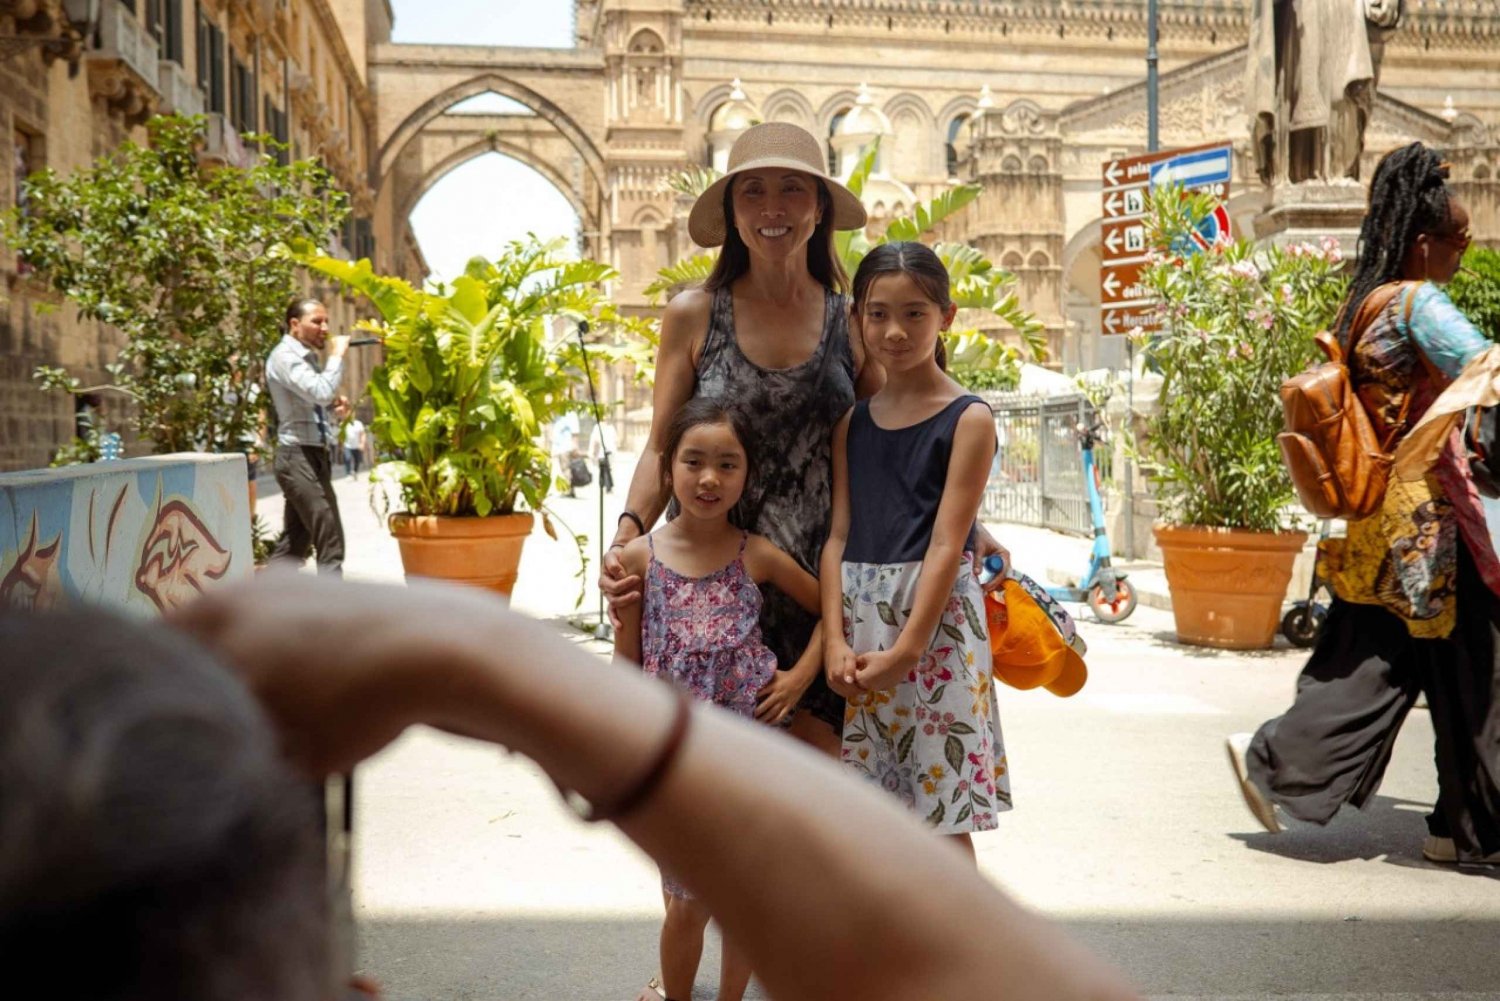 Explore Palermo's with a Food Tour & Pizza Making Class